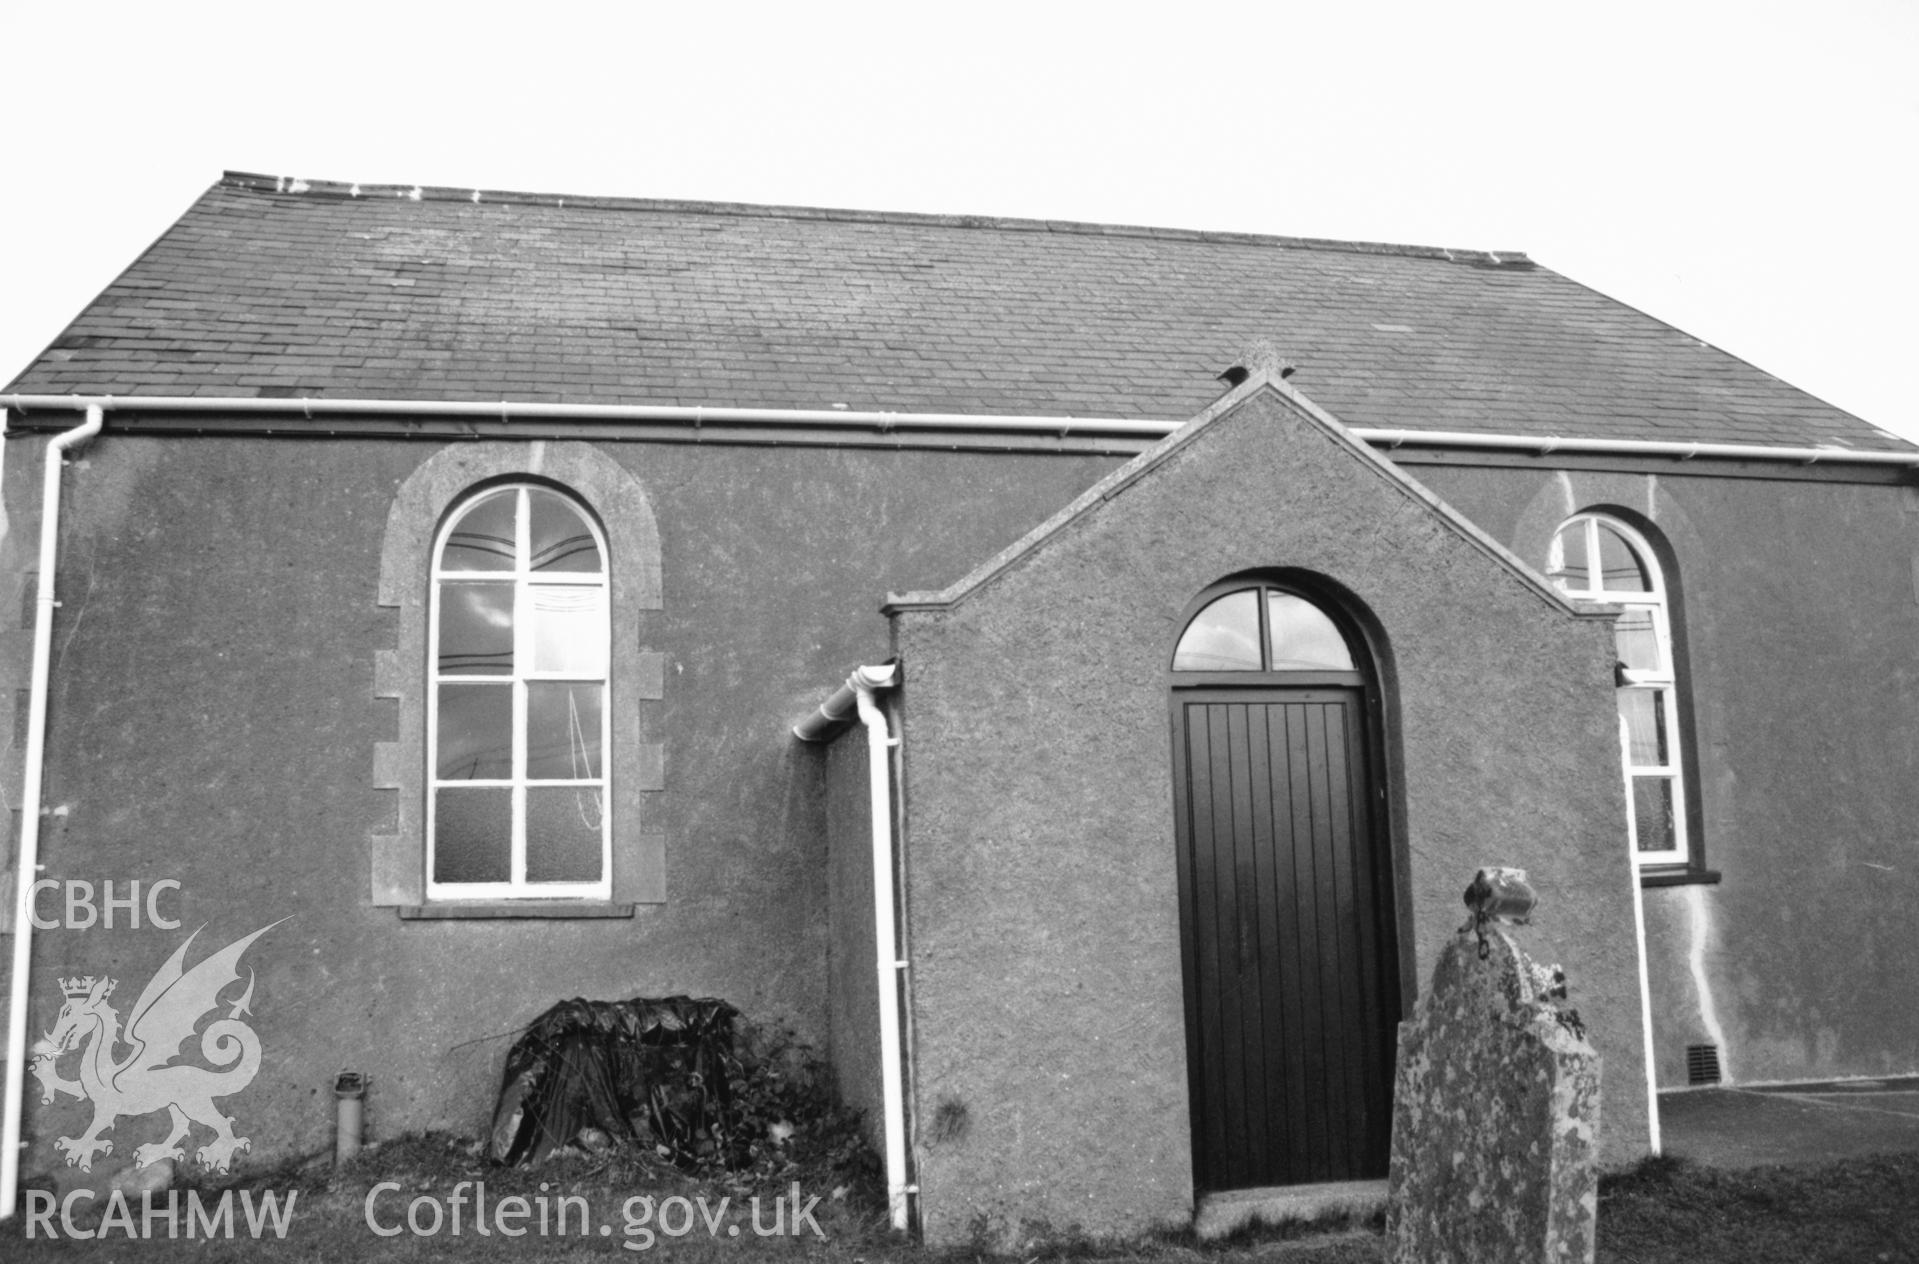 Digital copy of a black and white photograph showing an exterior view of Longstone Congregational Chapel, taken by Robert Scourfield, 1996.